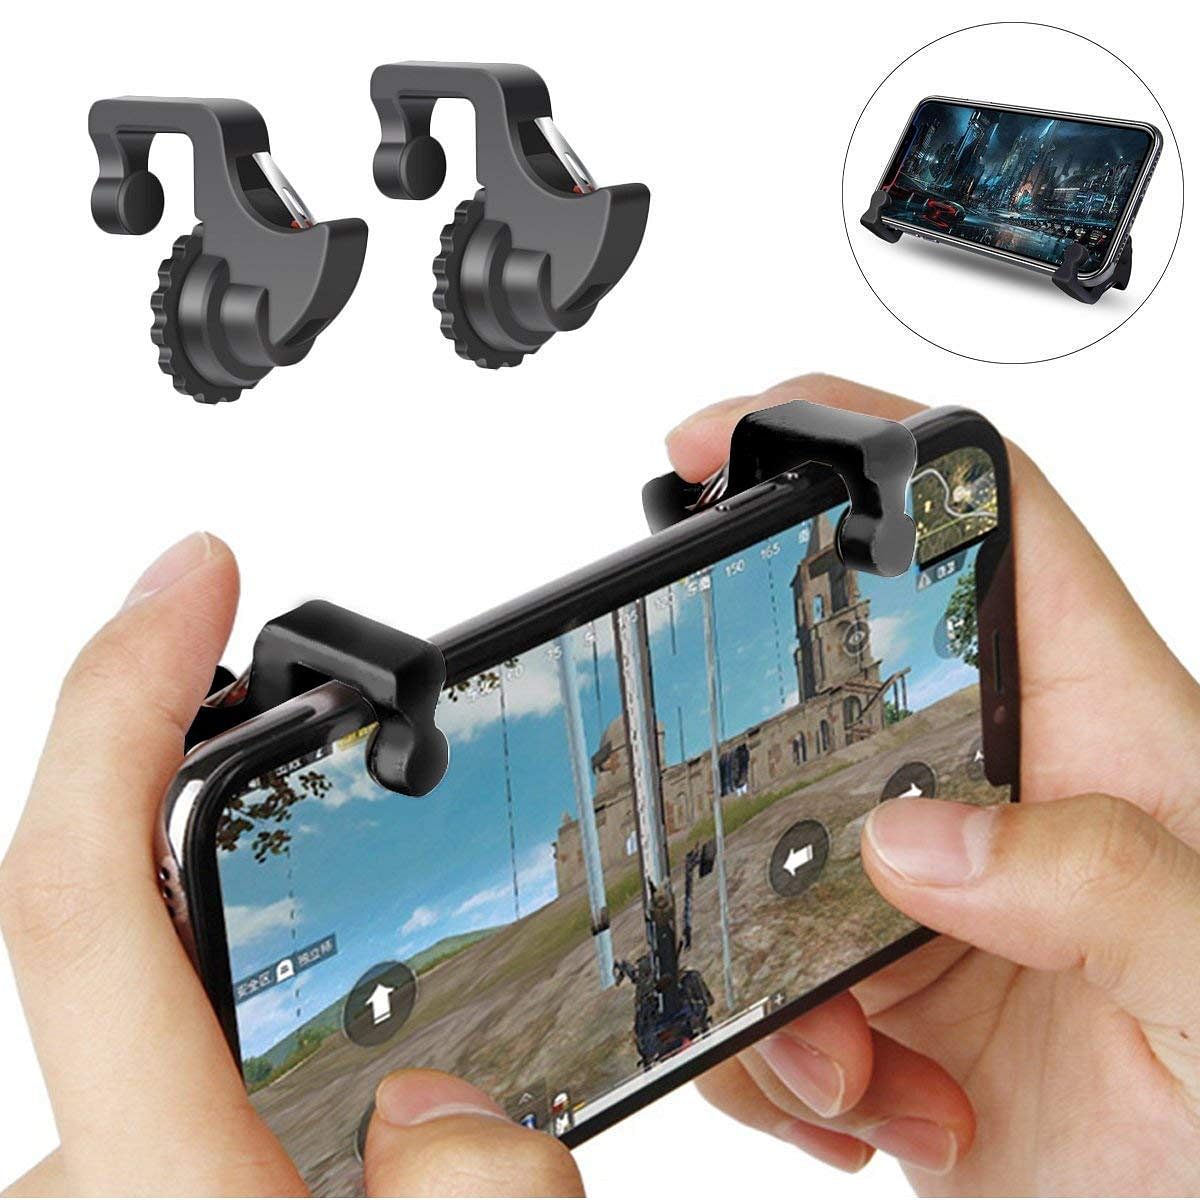 Forvirrede Vedholdende Advent Here Are 5 Mobile Gaming Accessories to Be a PUBG Pro